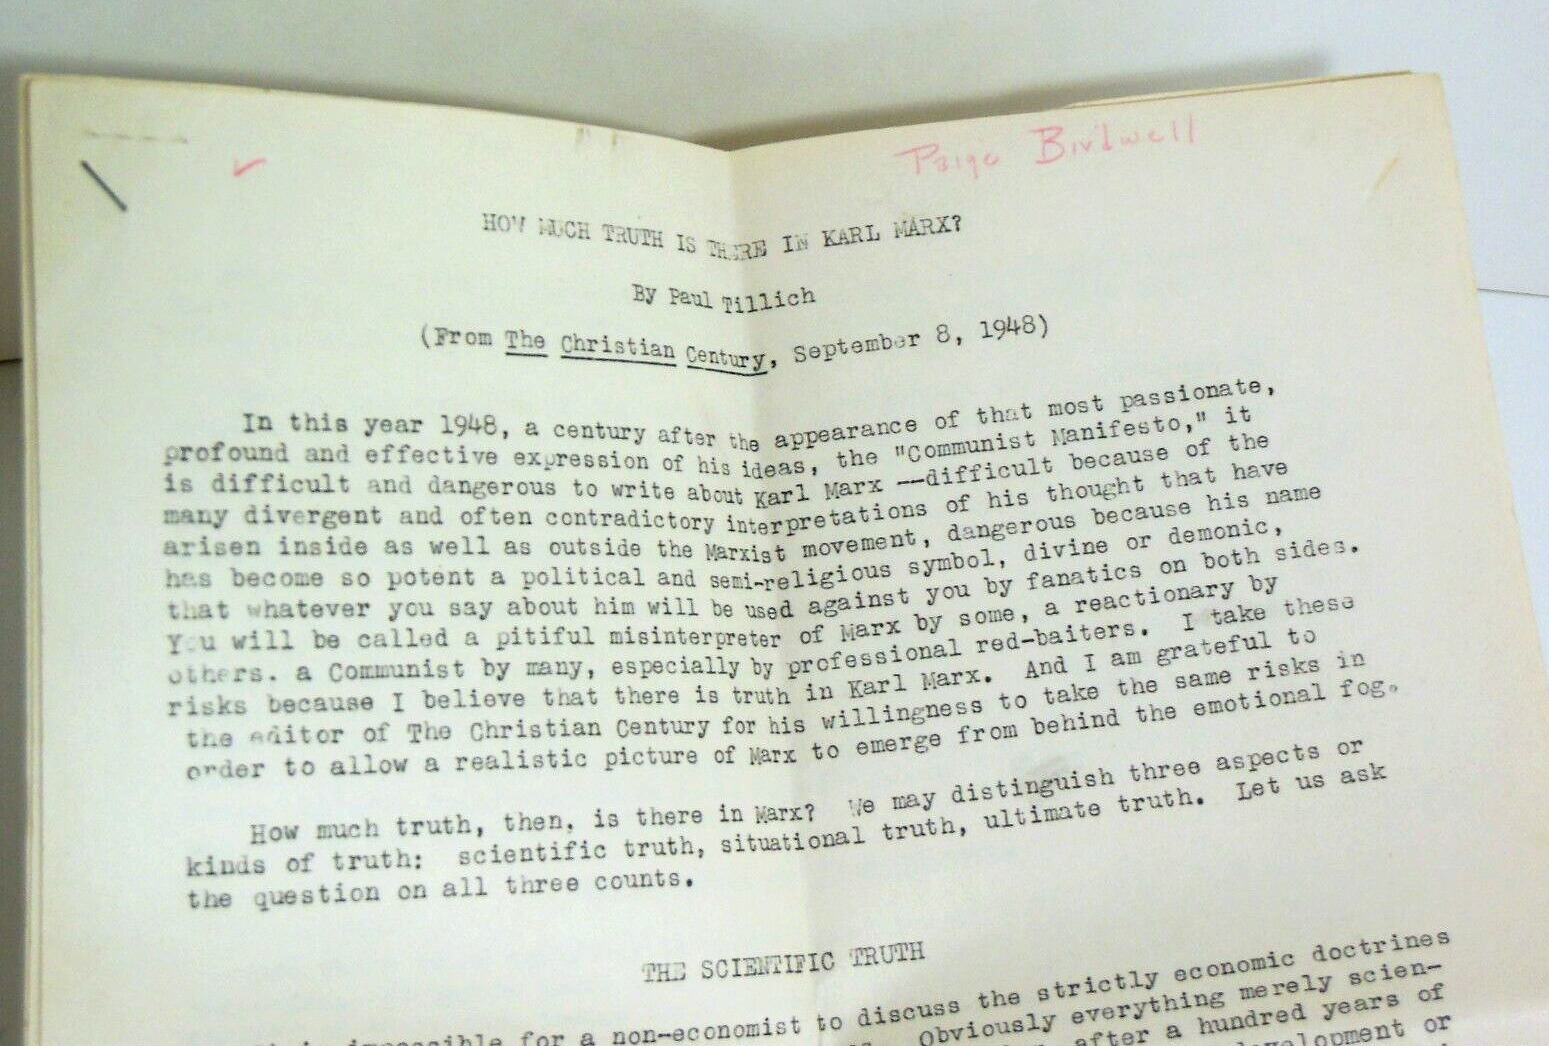 Paul Tillich 1948 Article How Much Truth Is There In Karl Marx Vtg Mimeo Pages